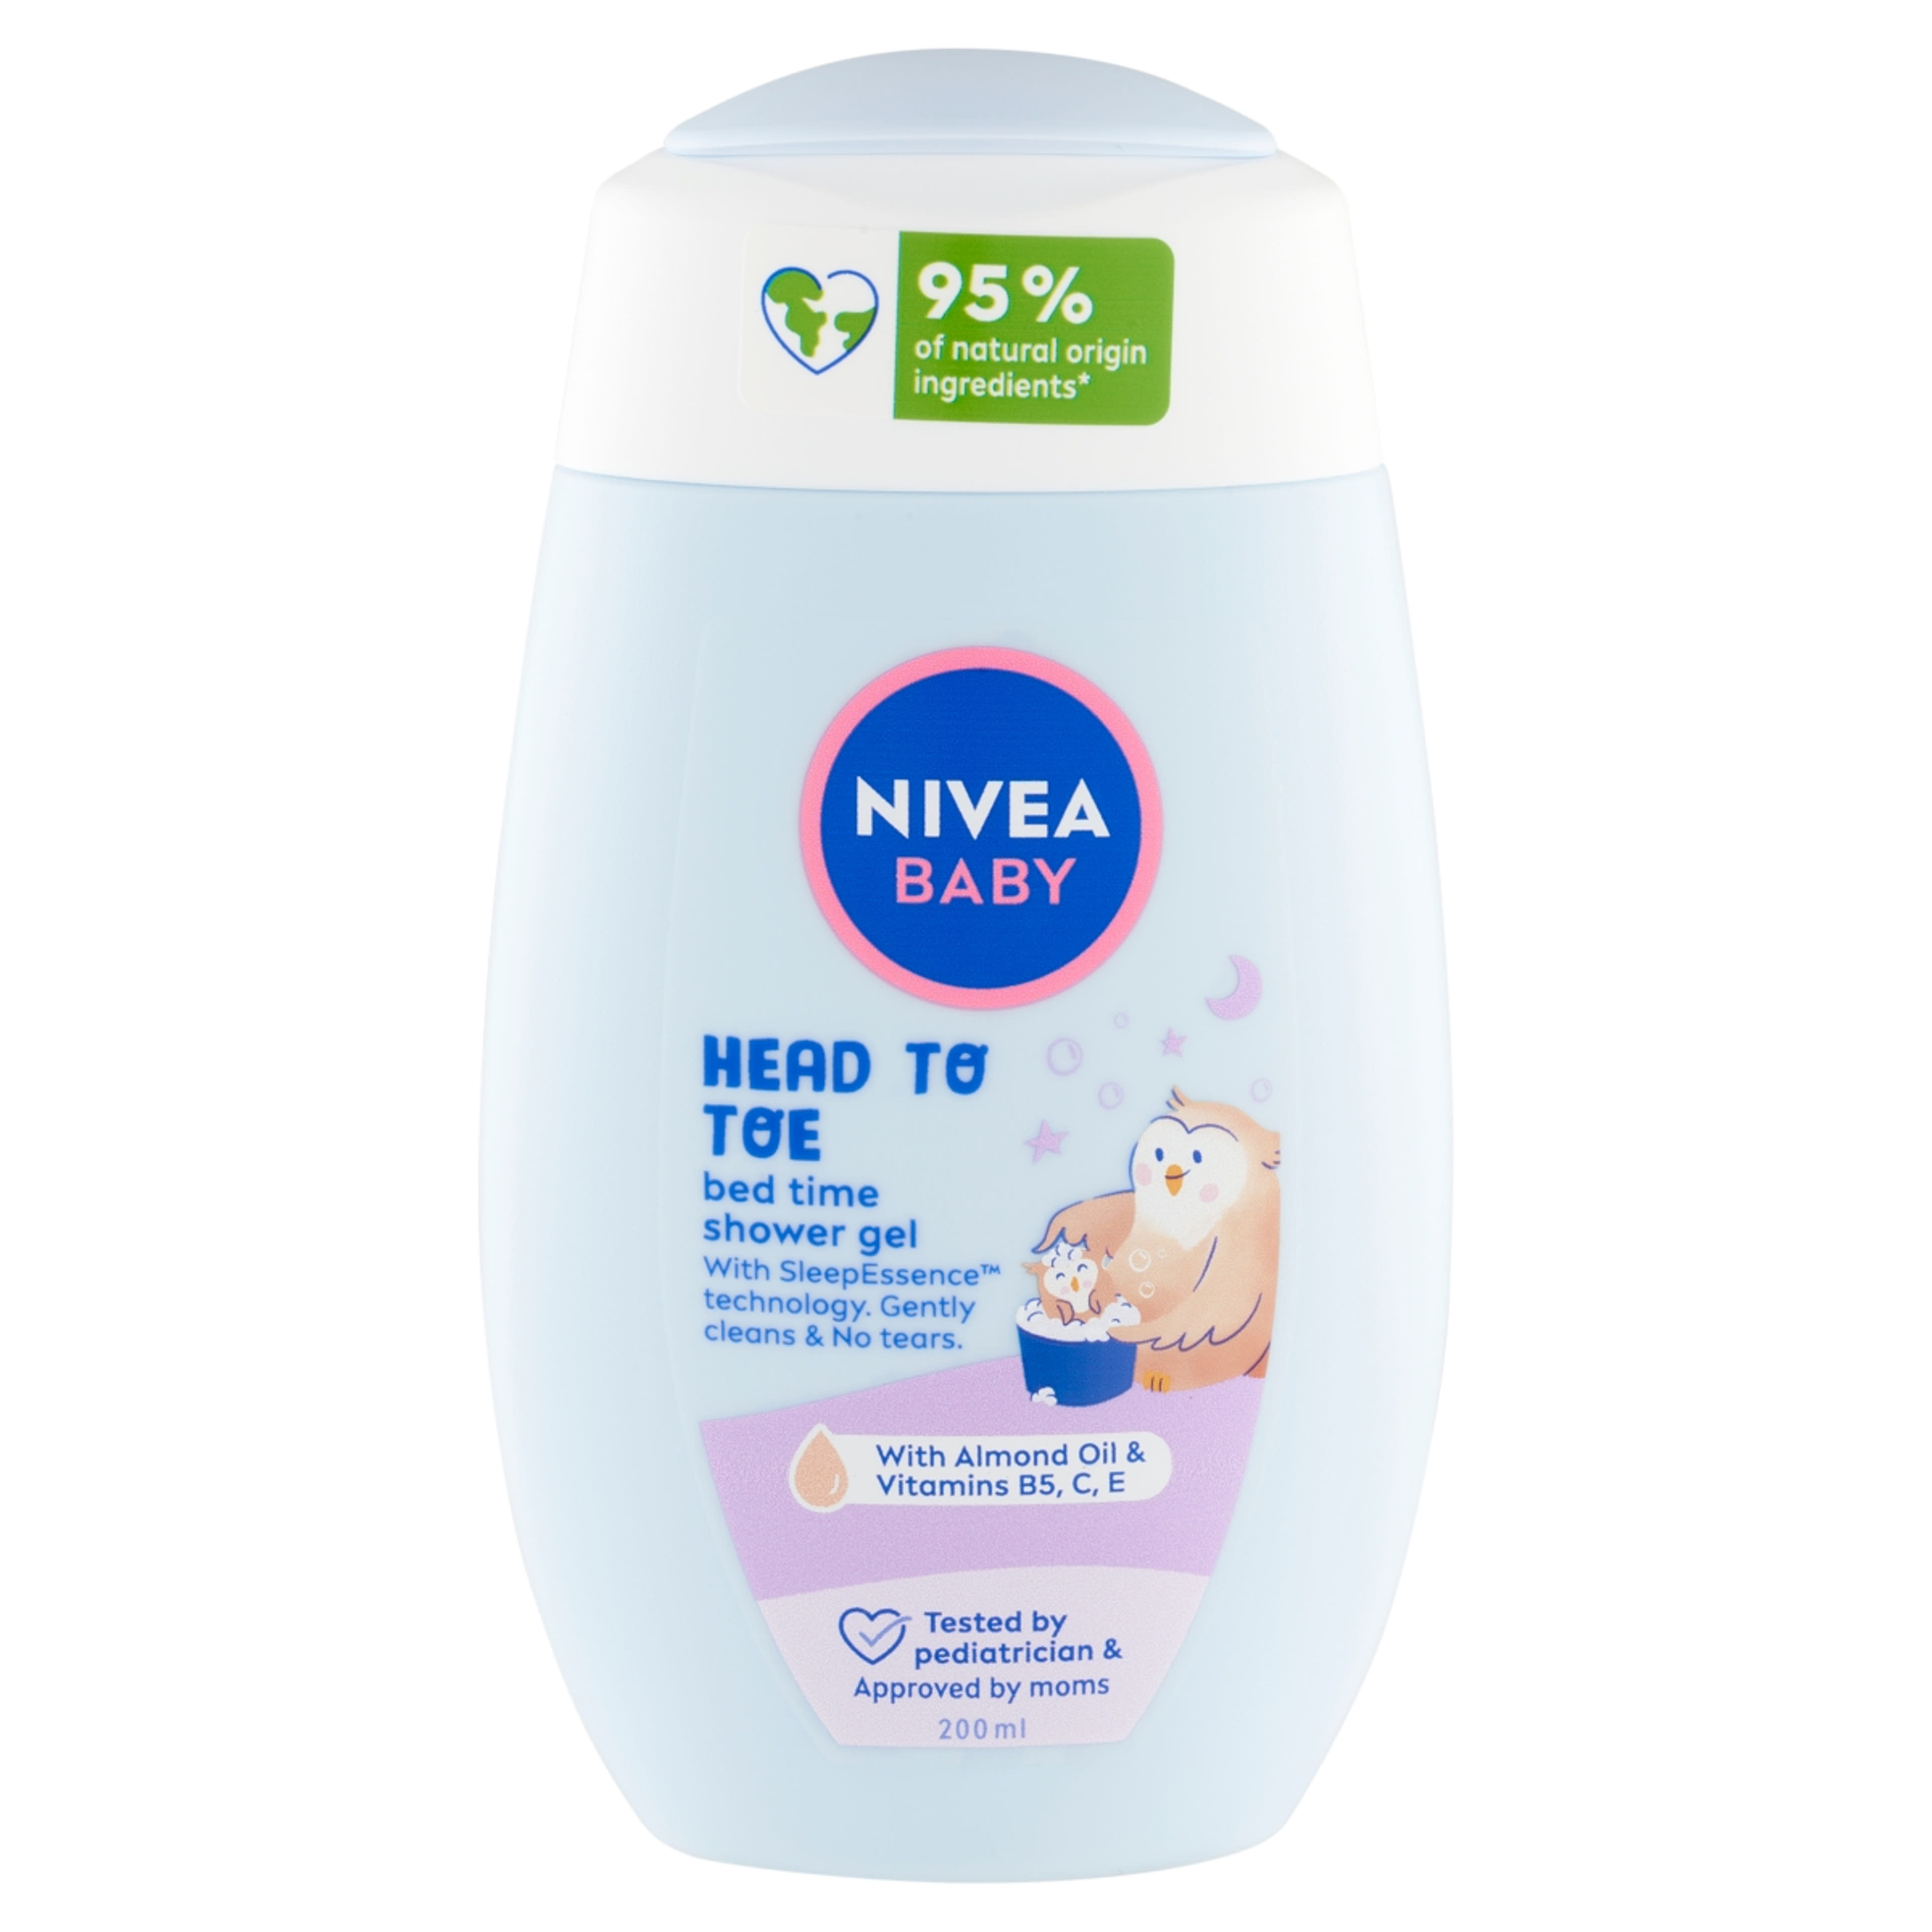 Nivea BABY Bed Time Head to Toe tusfürdő - 200 ml-3